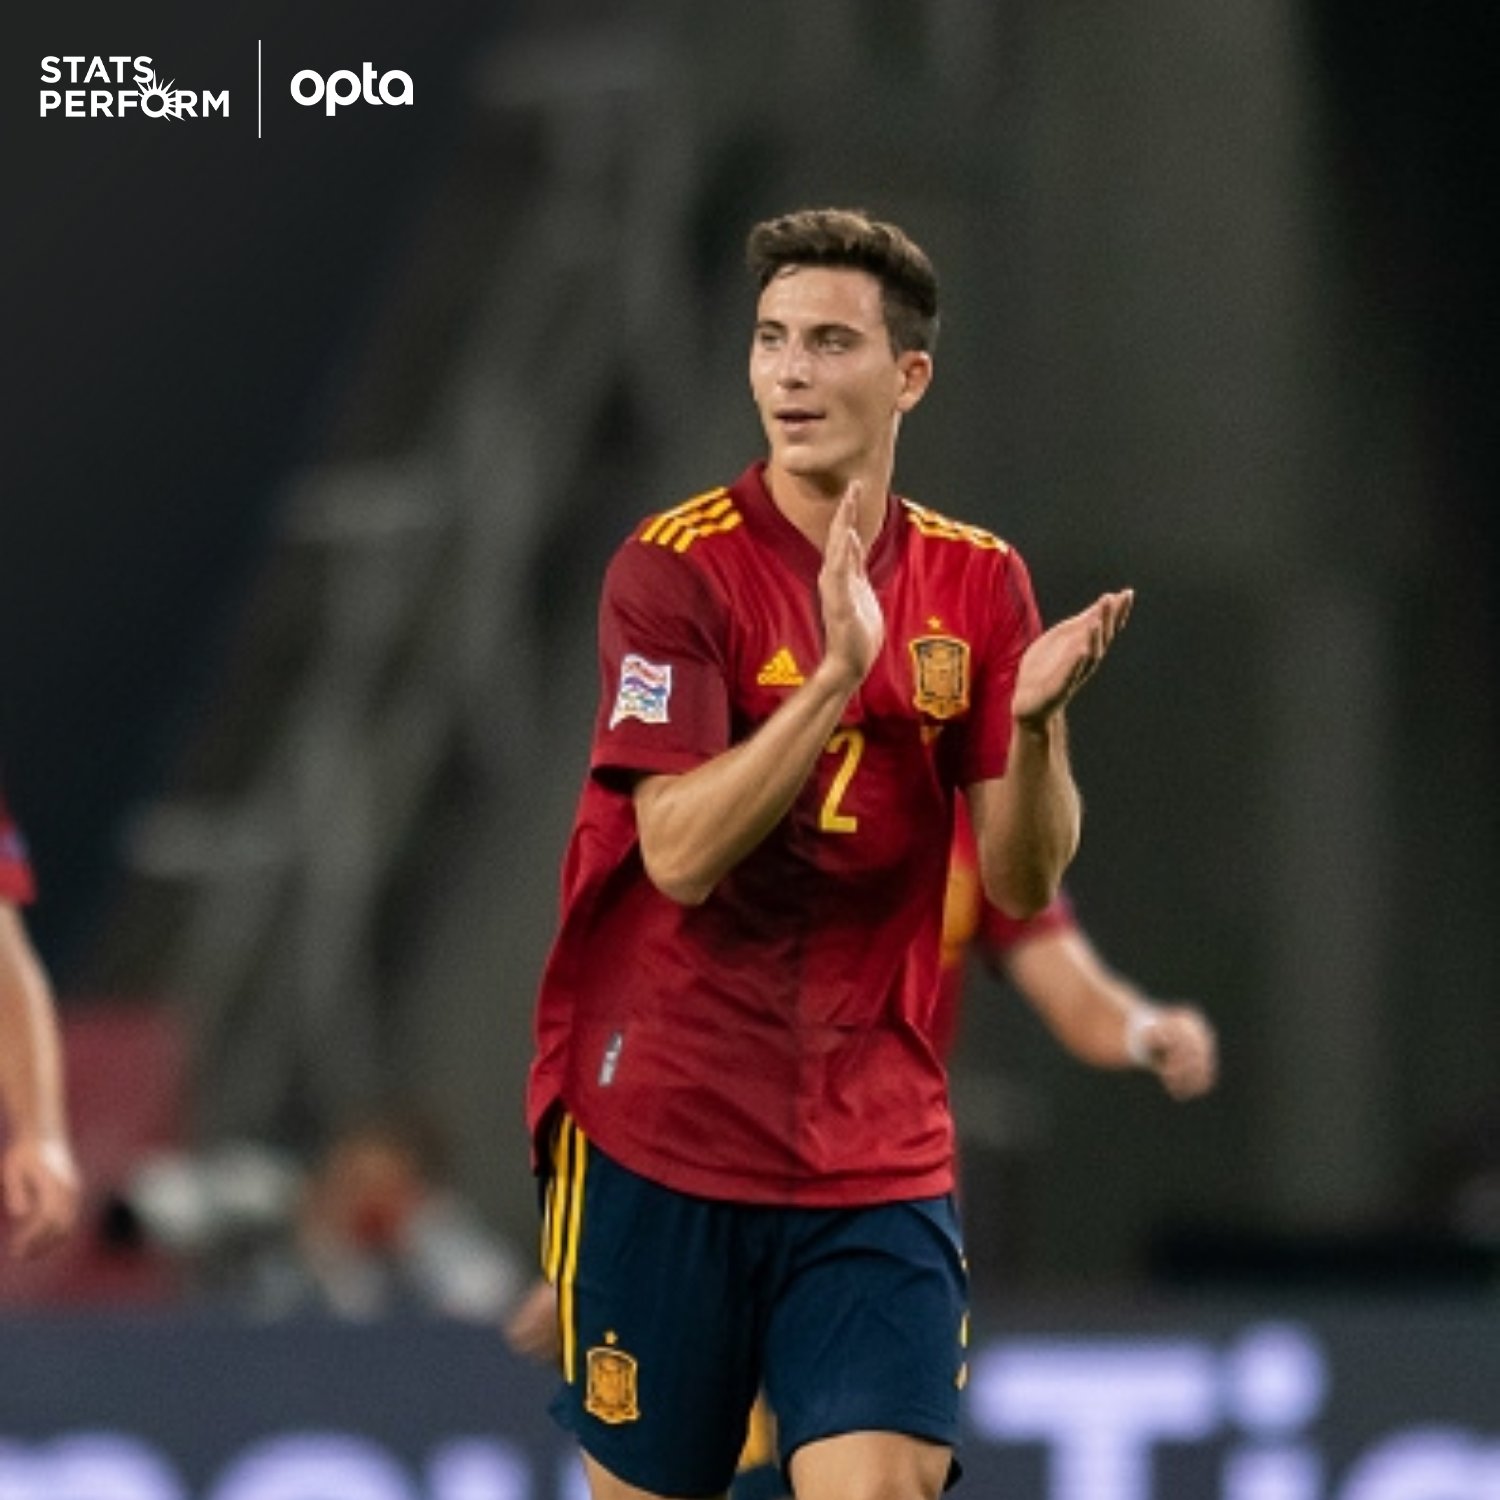 Optajose 121 Pau Torres Attempted 121 Passes For Spain Yesterday 115 Completed The Most By A Player In A Single Game Against Germany In The Last 10 Years